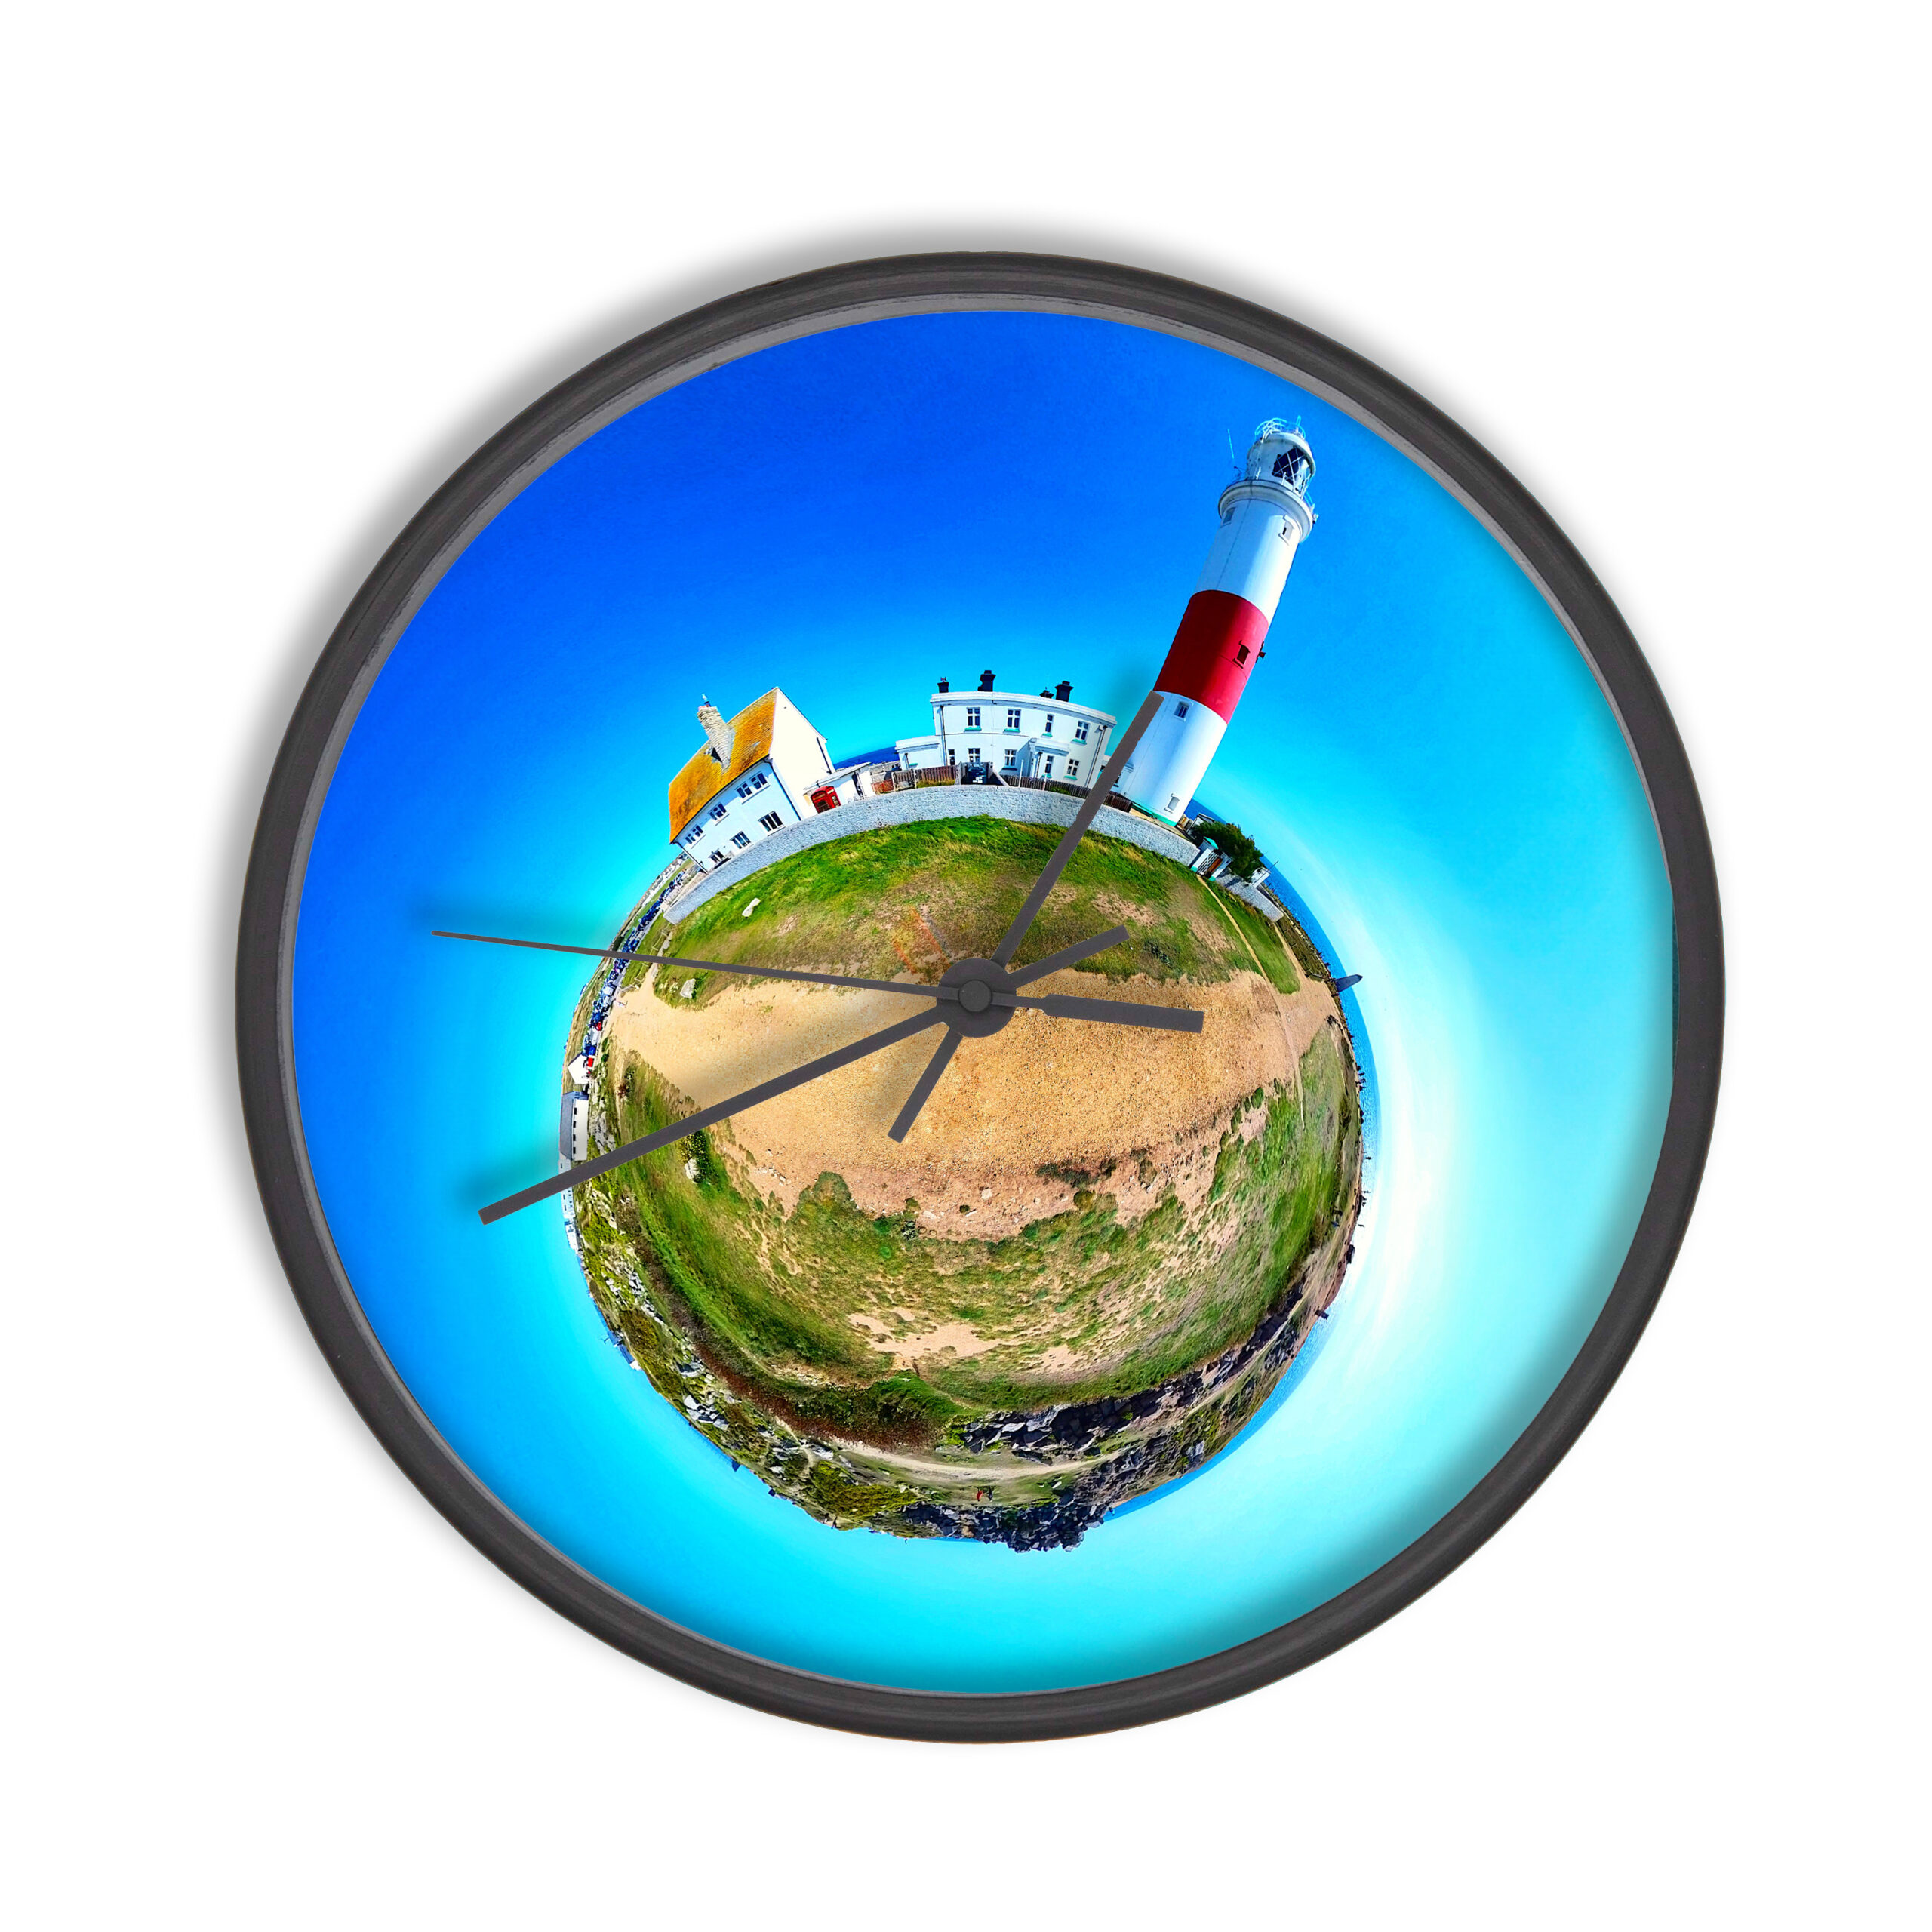 Portland Bill Lighthouse Tiny Planet Clock - Tiny Planet Things - Unique handmade seaside, coastal, tourist attraction gifts for sale.